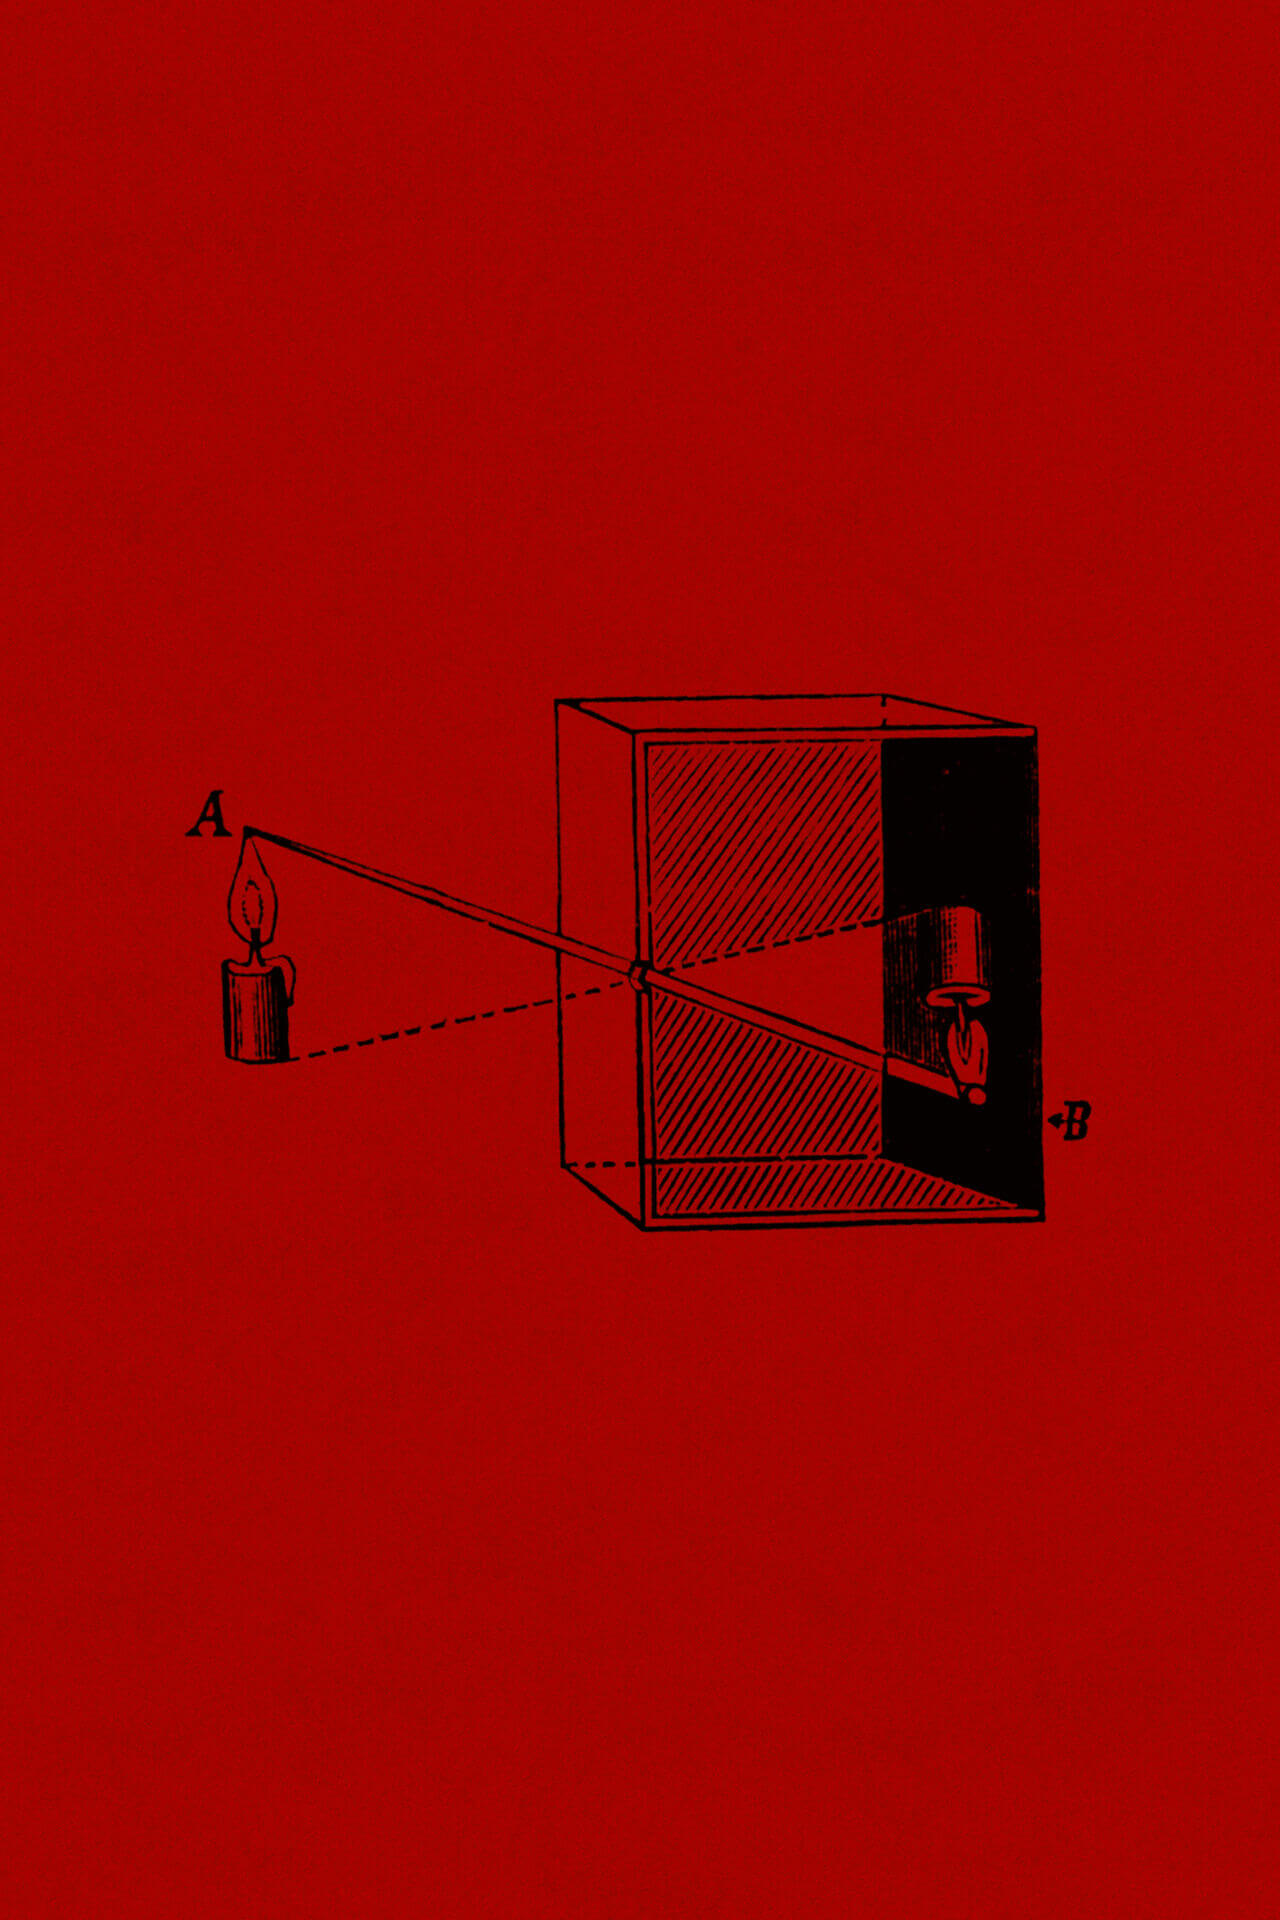 Illustration of the camera oscura principle dark on red in A4 portrait format